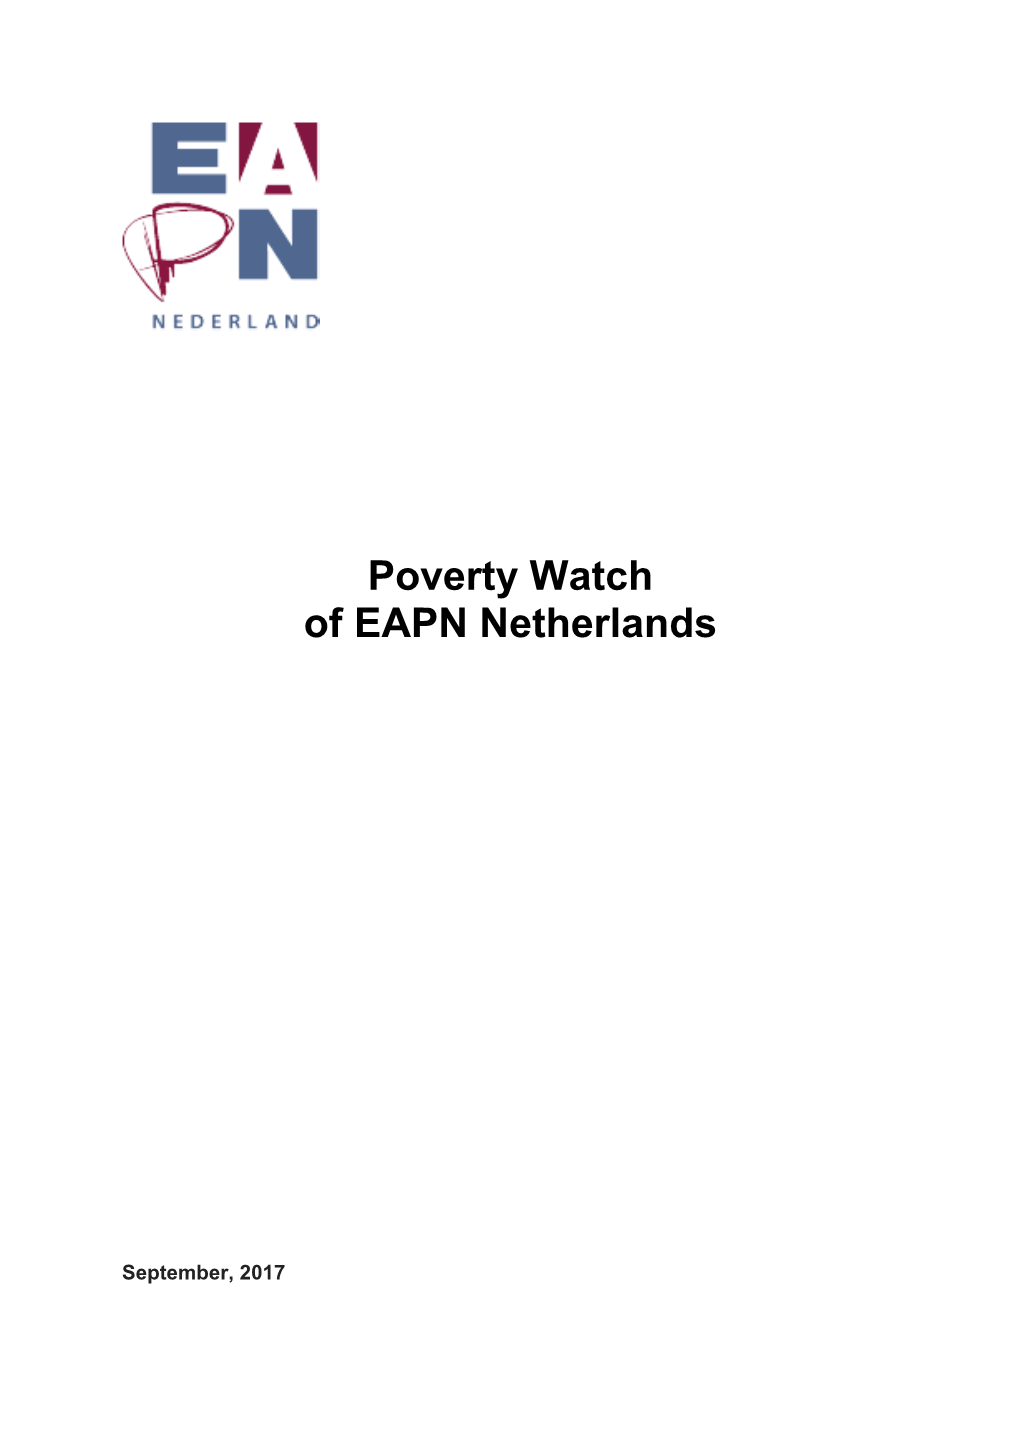 Poverty Watch of EAPN Netherlands